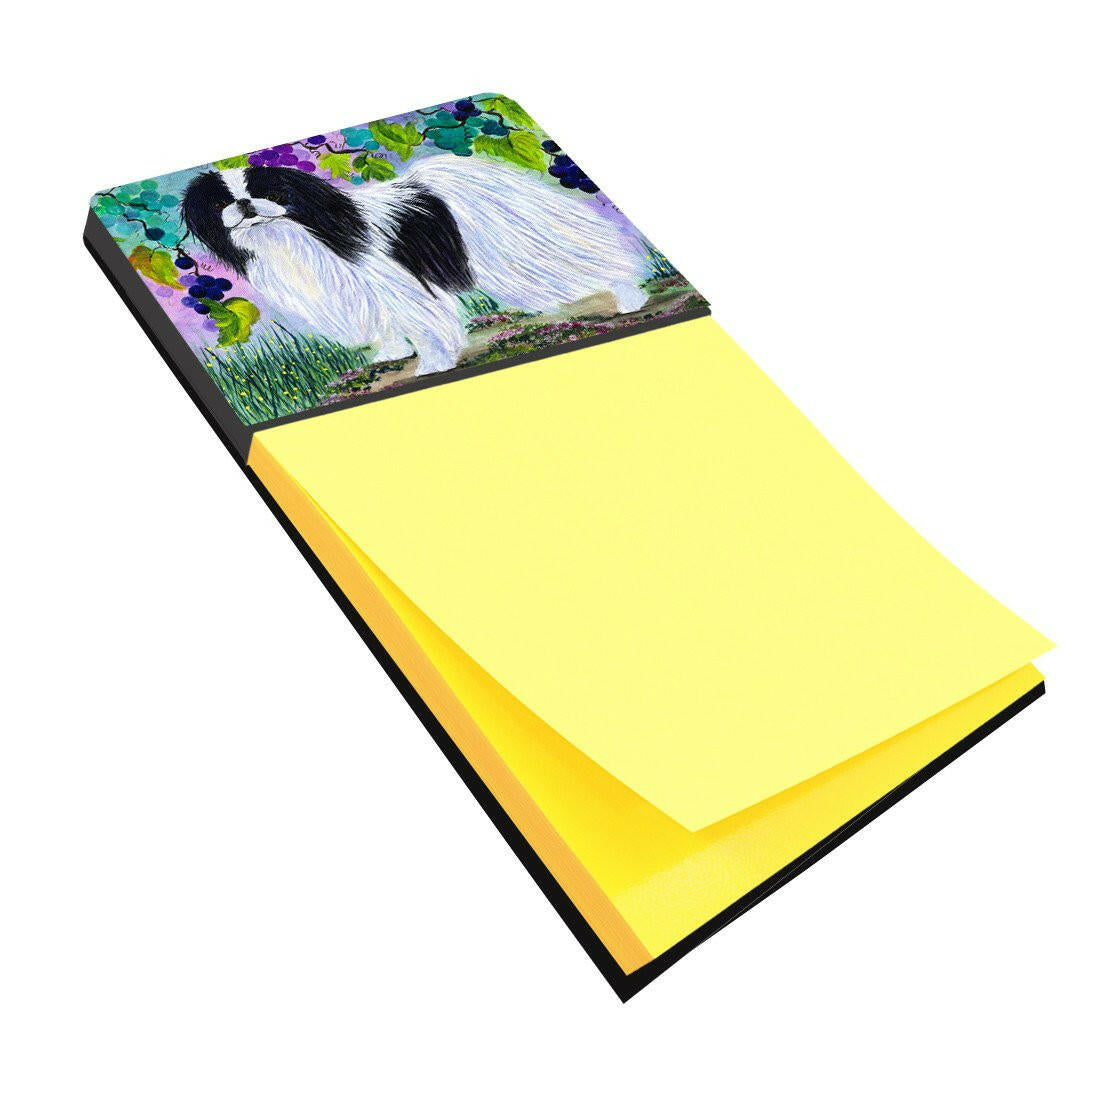 Japanese Chin Refiillable Sticky Note Holder or Postit Note Dispenser SS8270SN by Caroline's Treasures